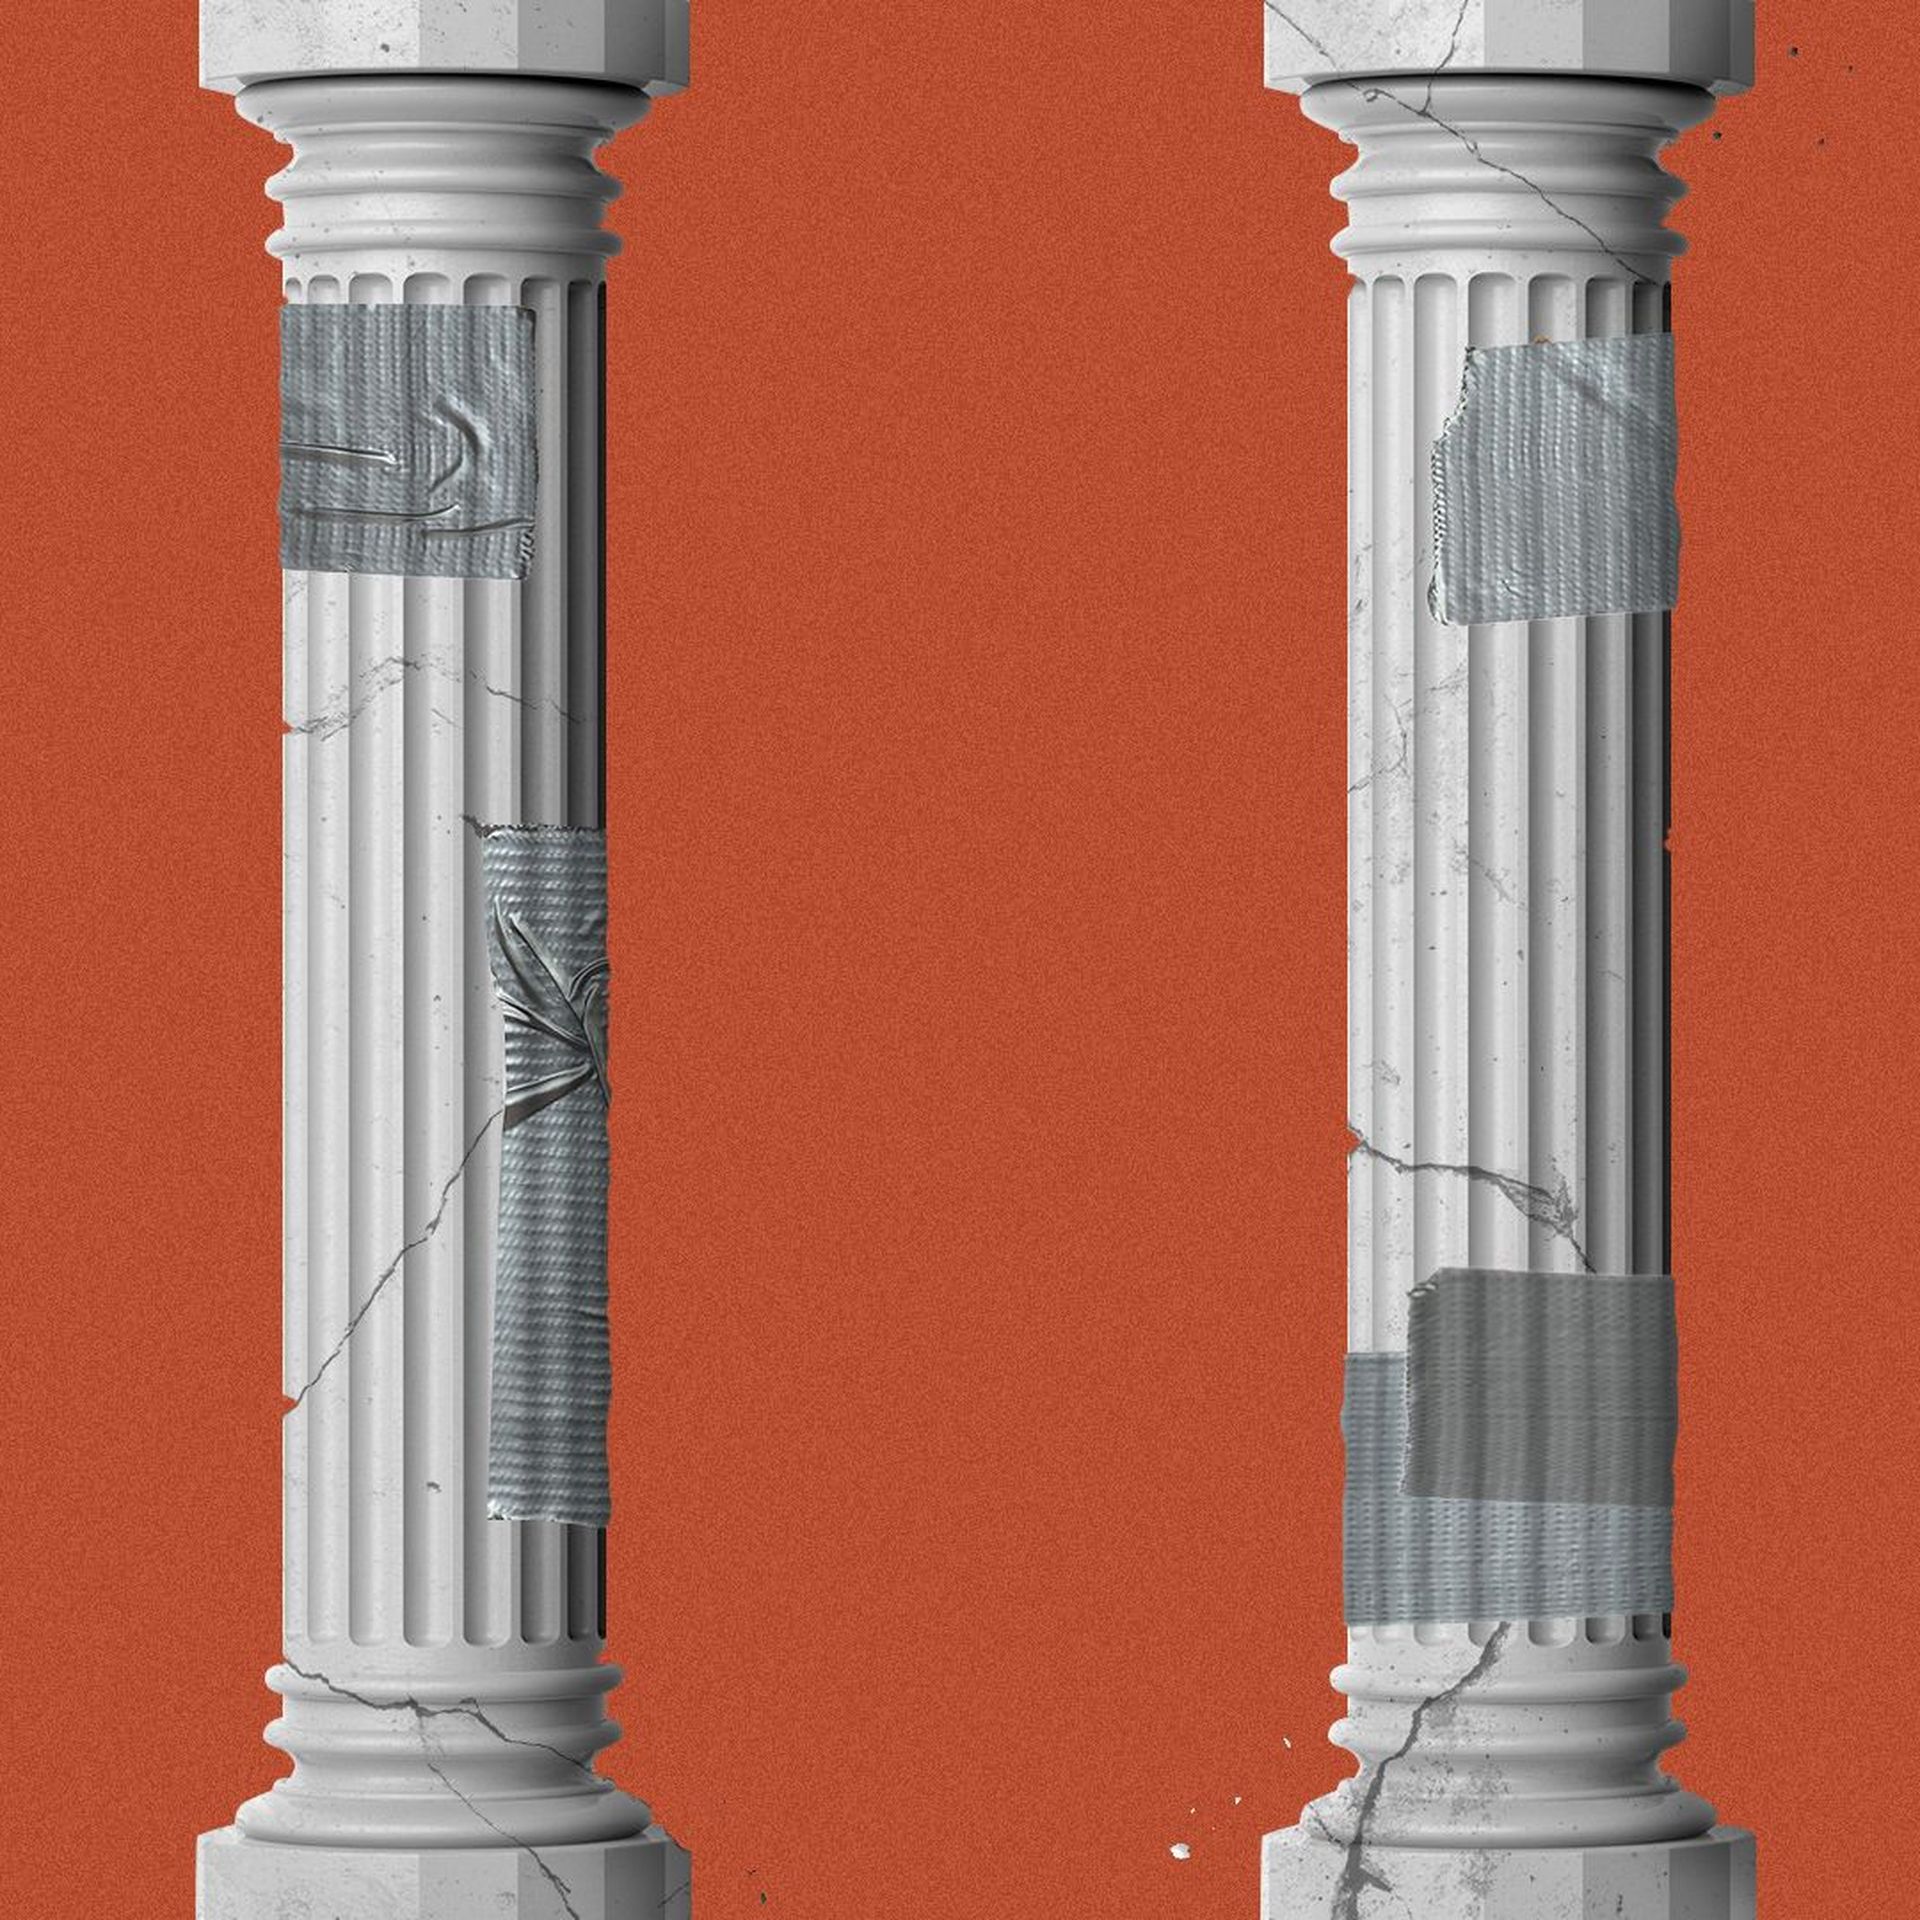 Illustration of crumbling columns with duct tape holding them together. 